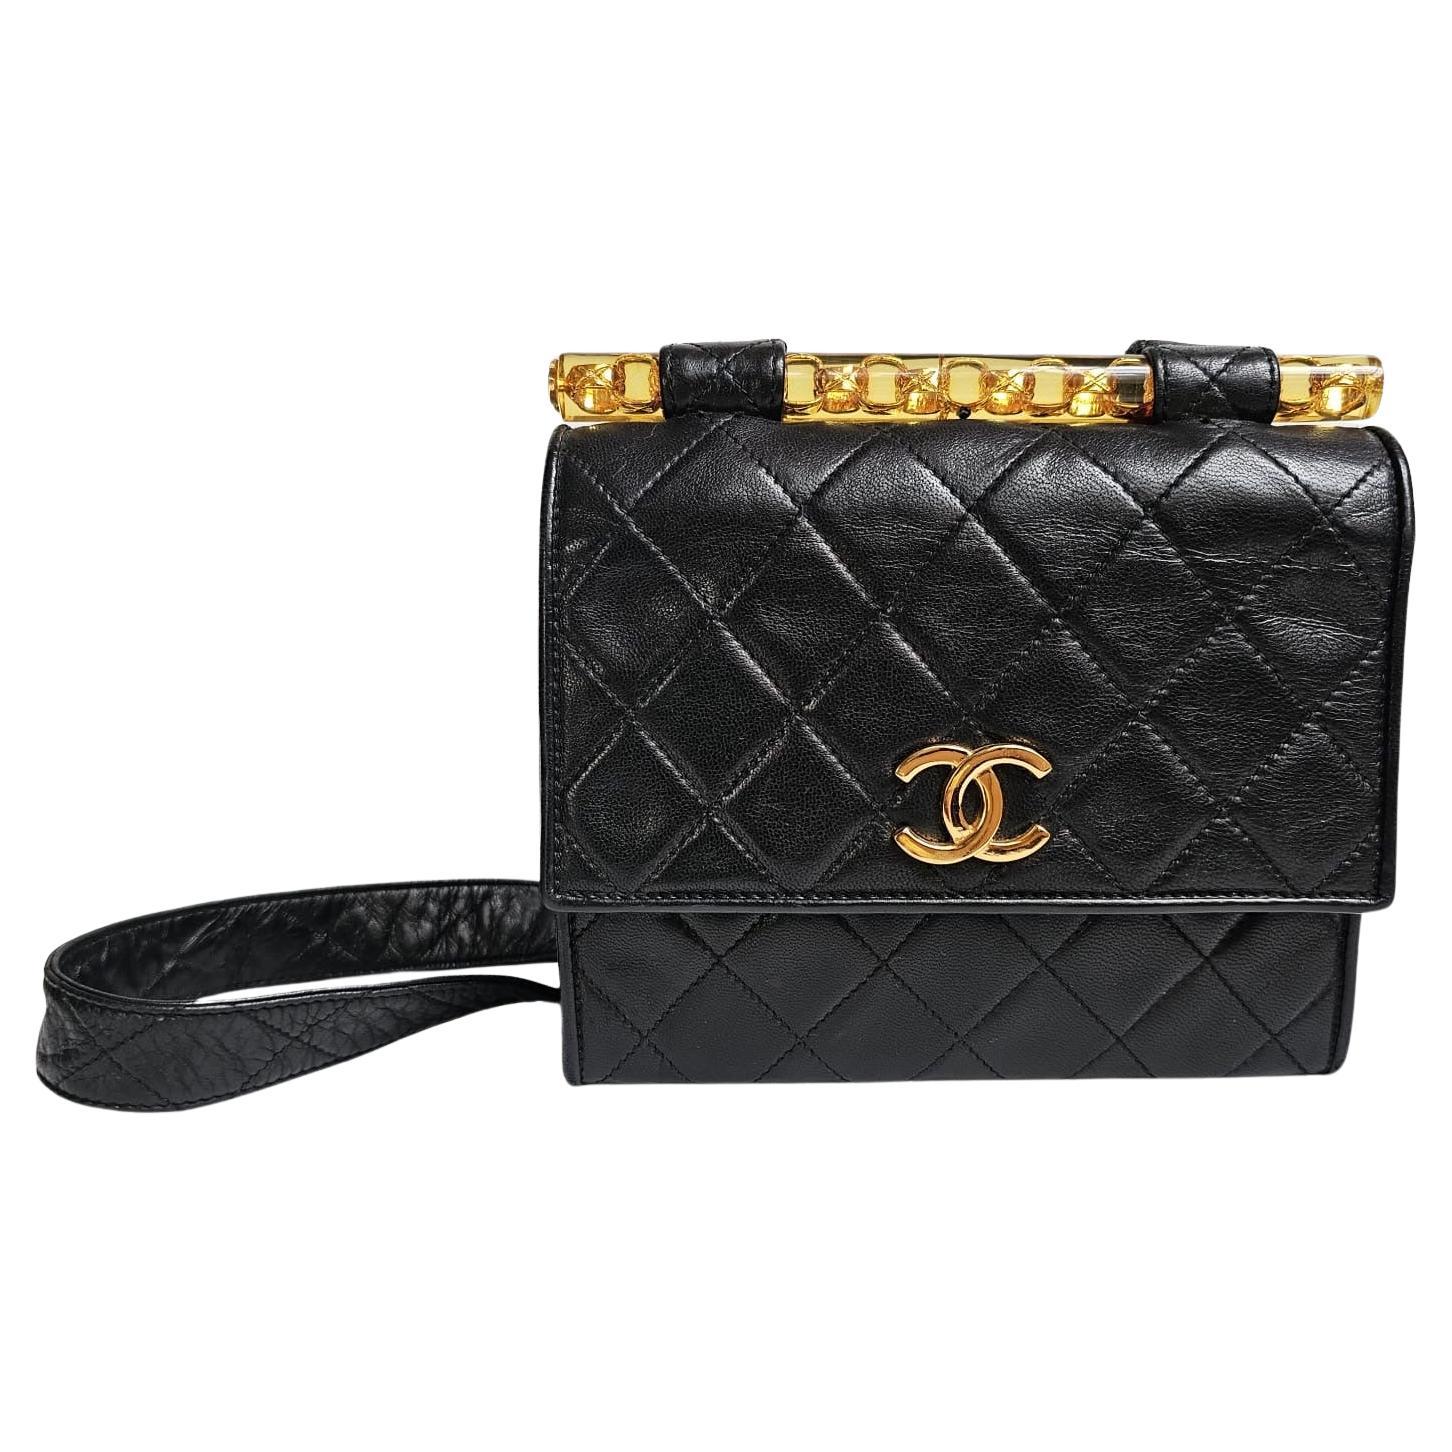 How do I know what model my Chanel bag is?